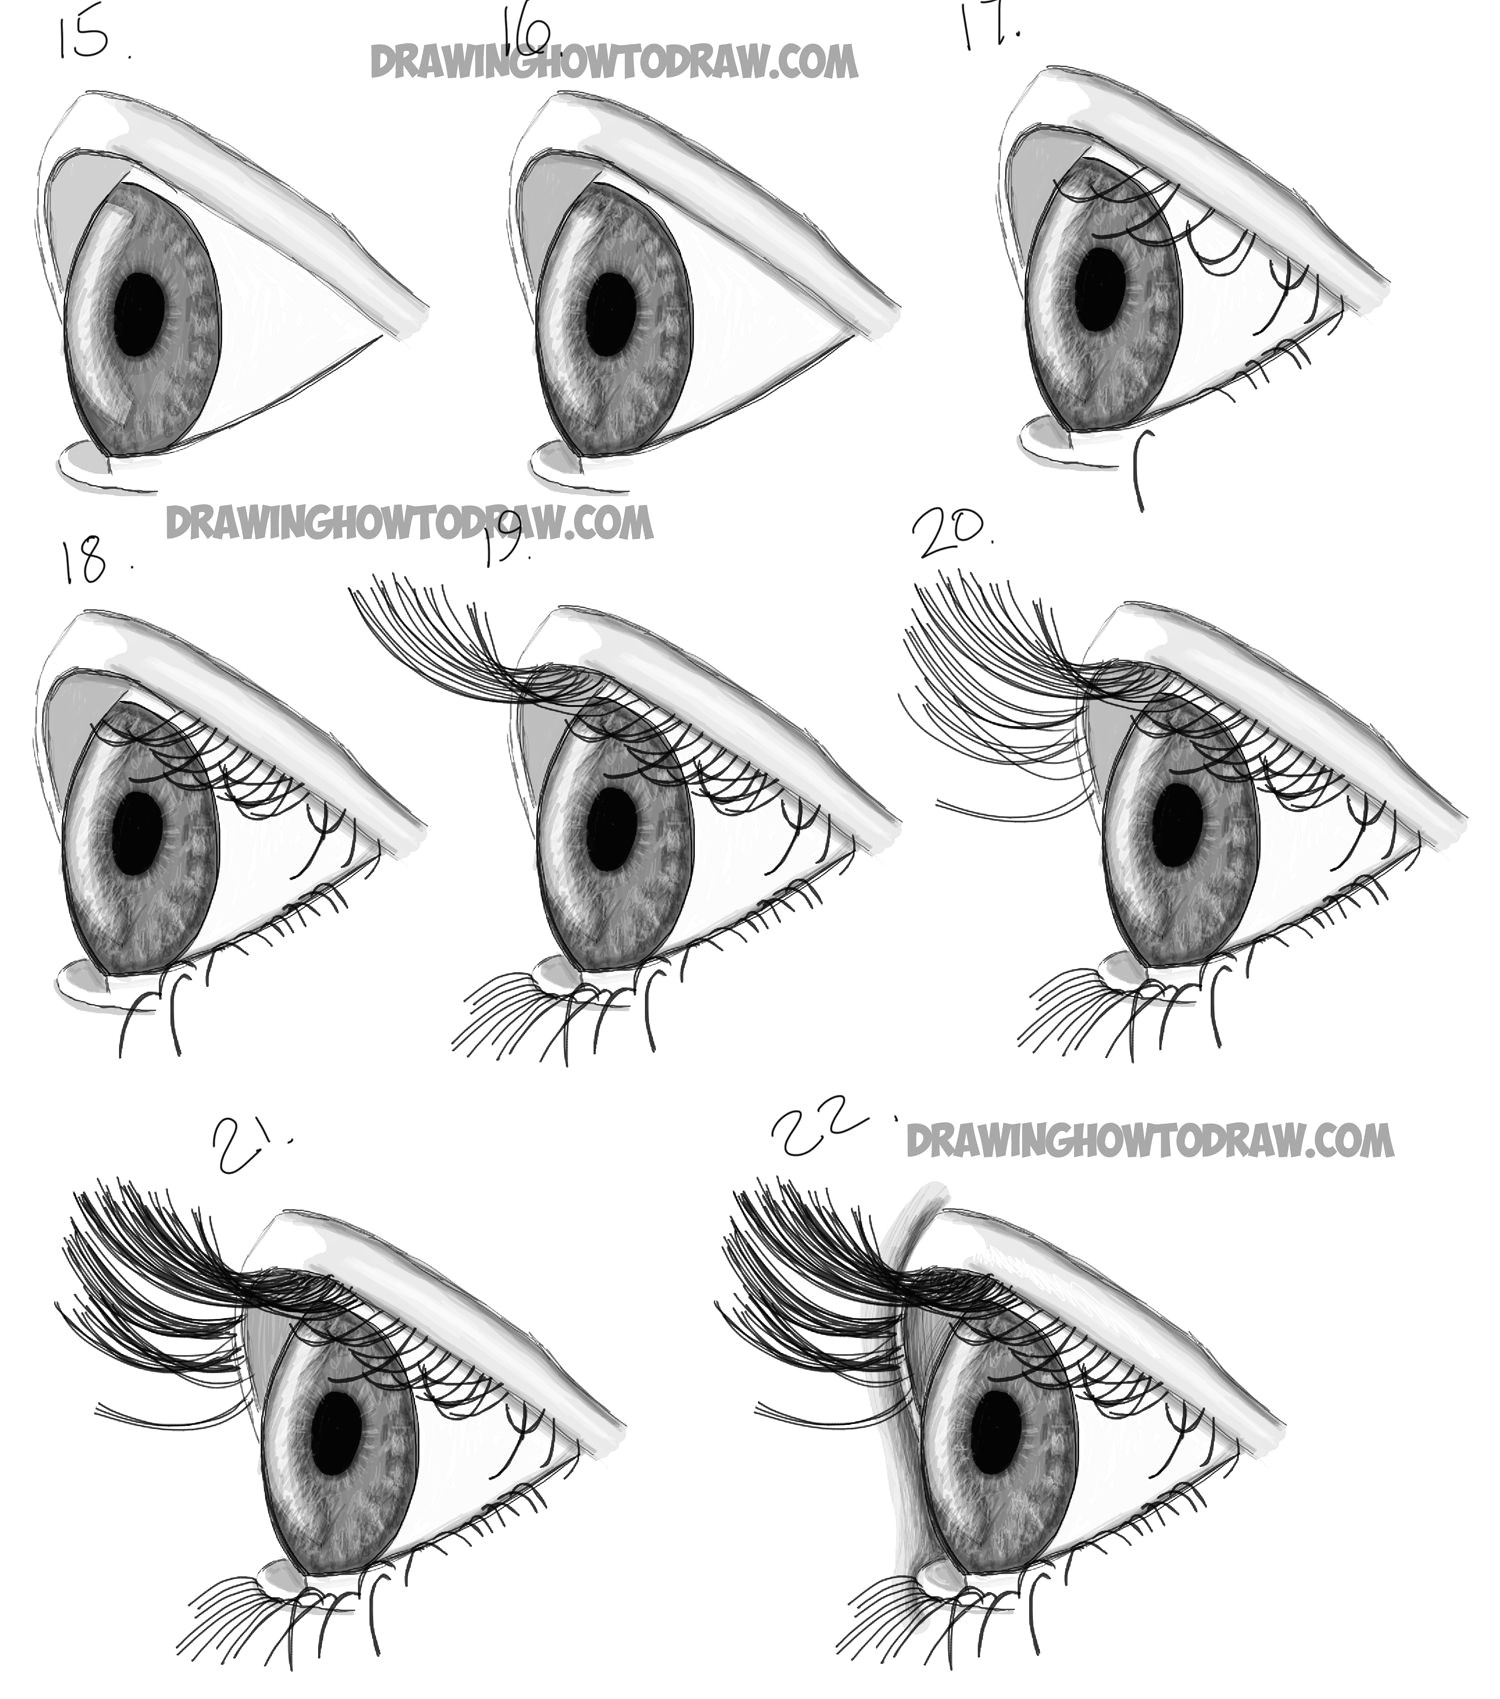 Drawing Eyes Artists How to Draw Realistic Eyes From the Side Profile View Step by Step